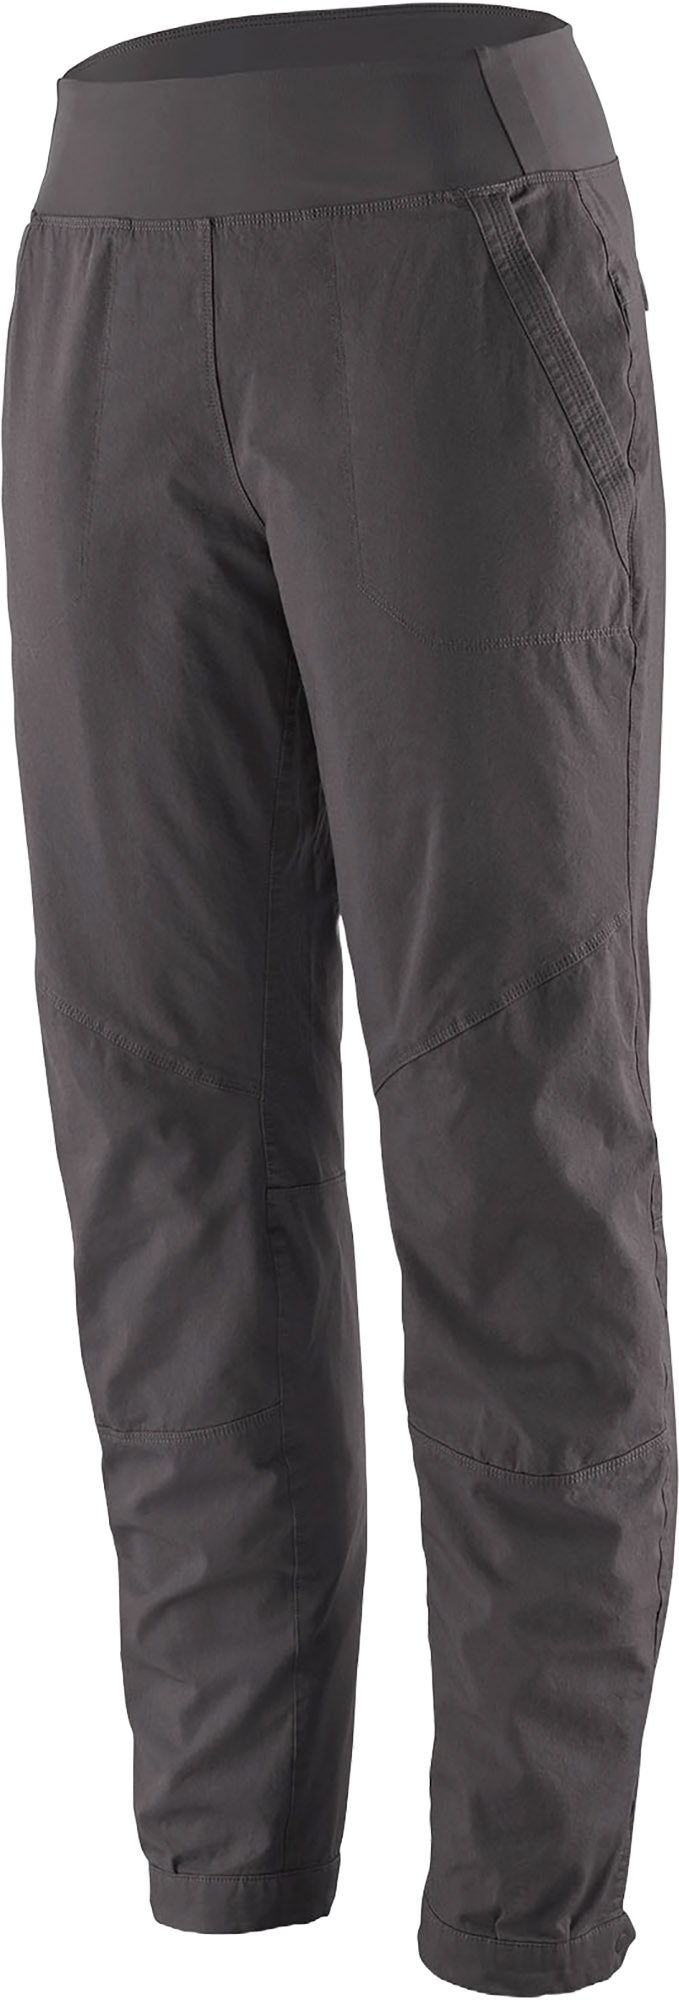 Patagonia Caliza: First Look at a Go-To Crag Pant